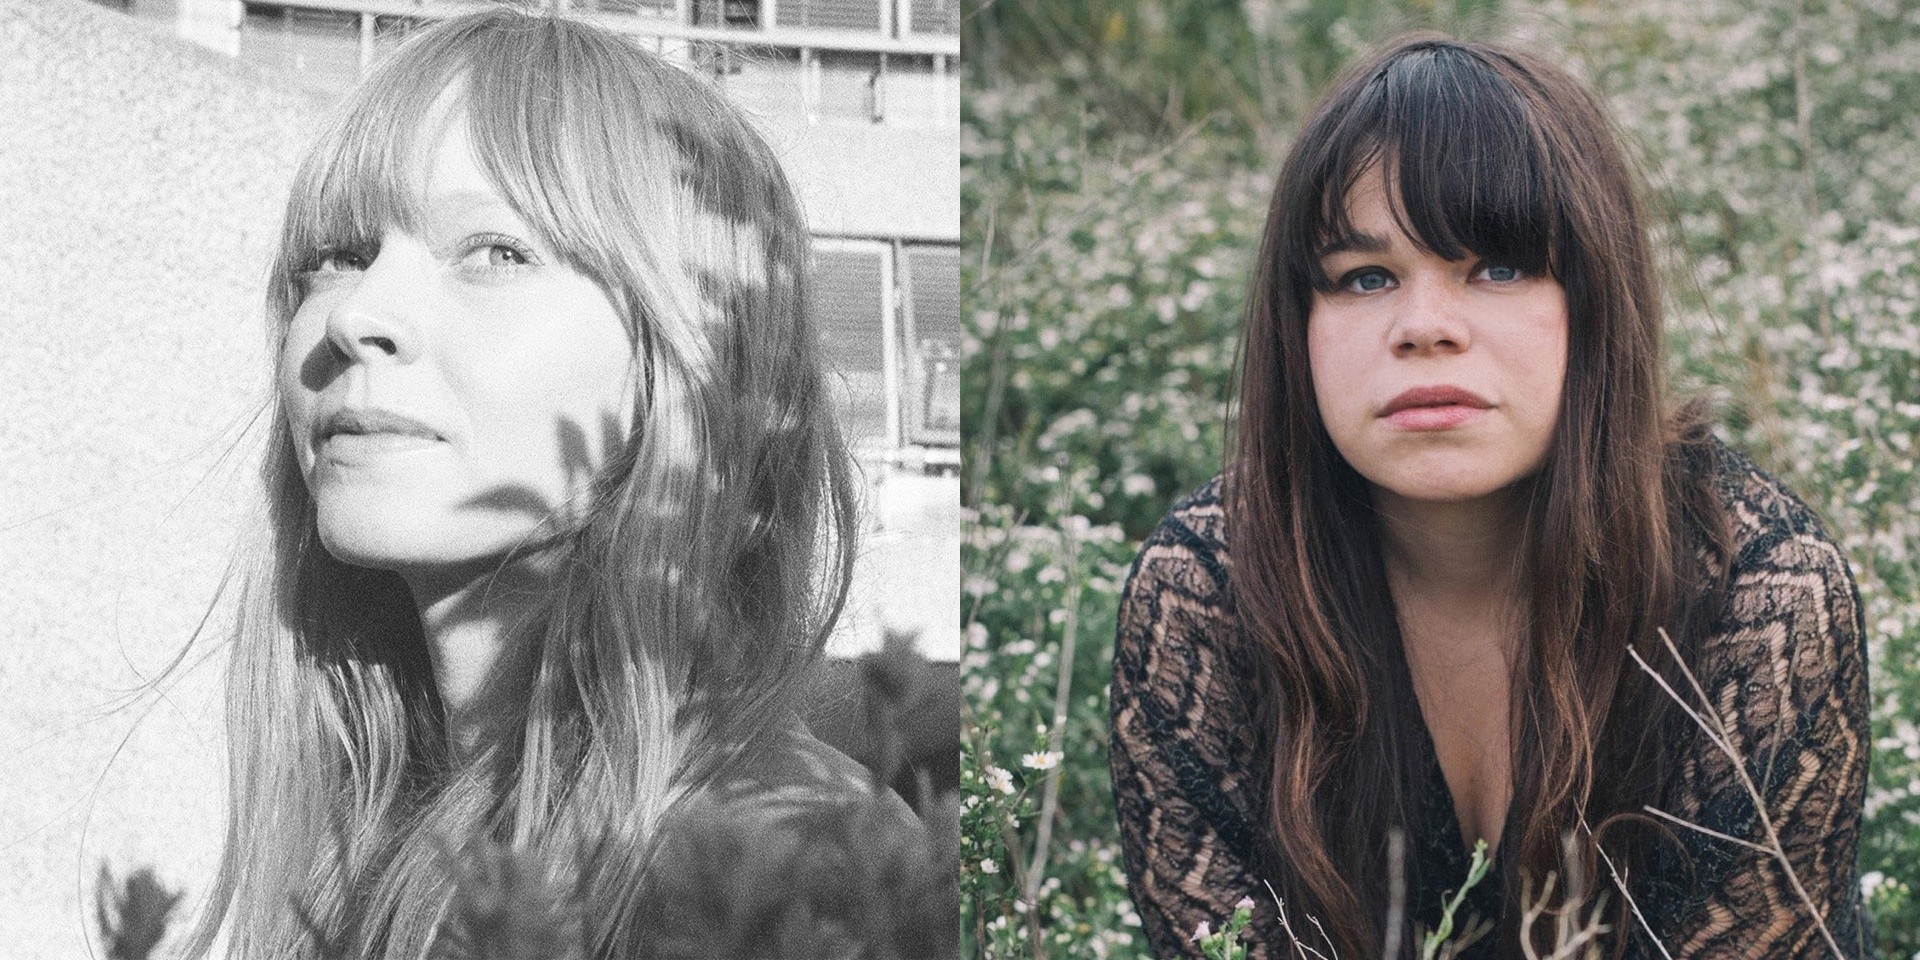 Lucy Rose launches independent label Real Kind Records, debuts first signee Samantha Crain's single 'An Echo' – listen